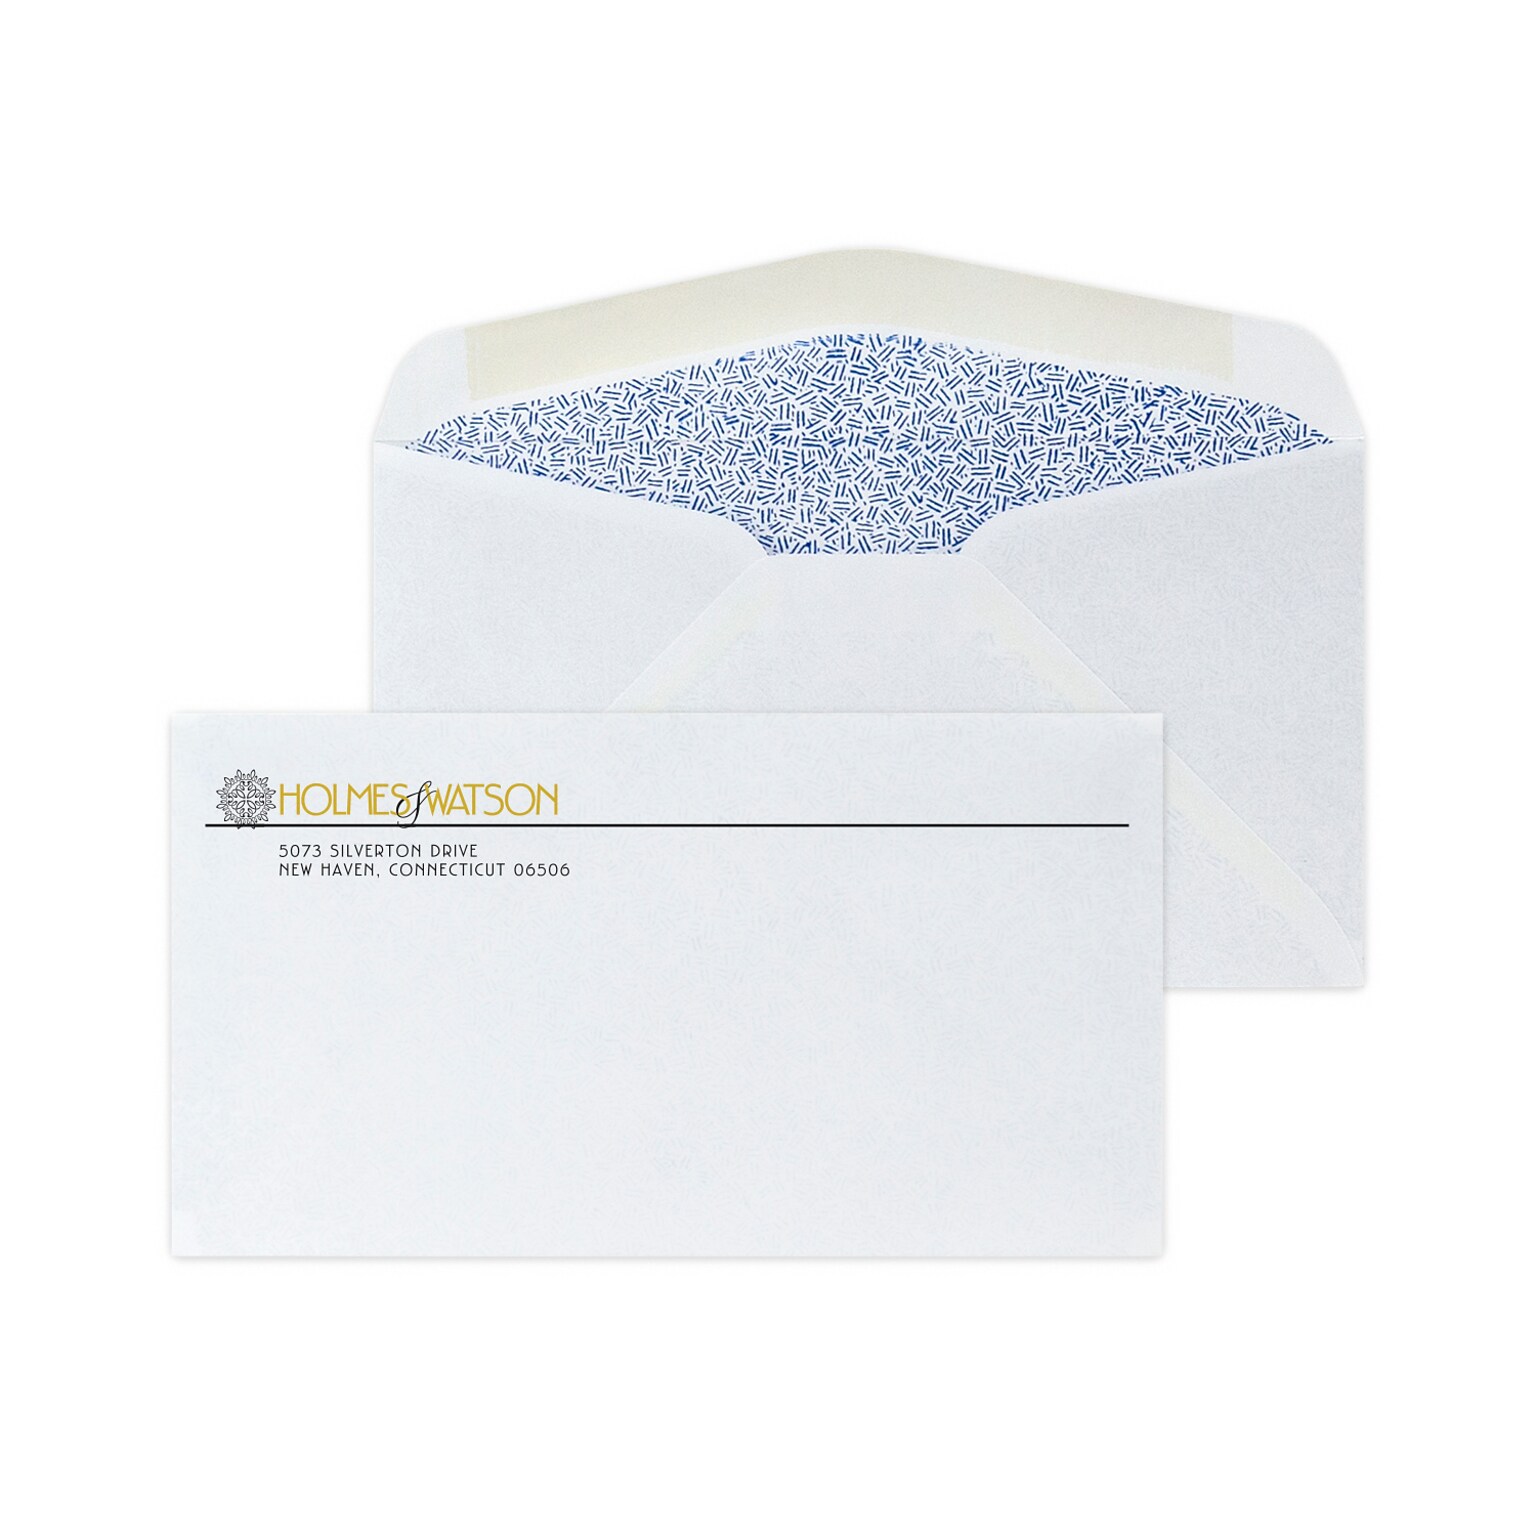 Custom #6-3/4 Diagonal Seam Std Envelopes with Security Tint, 3 5/8x6 1/2, 24# White Wove, 1 Std and 1 Custom Inks, 250/Pack